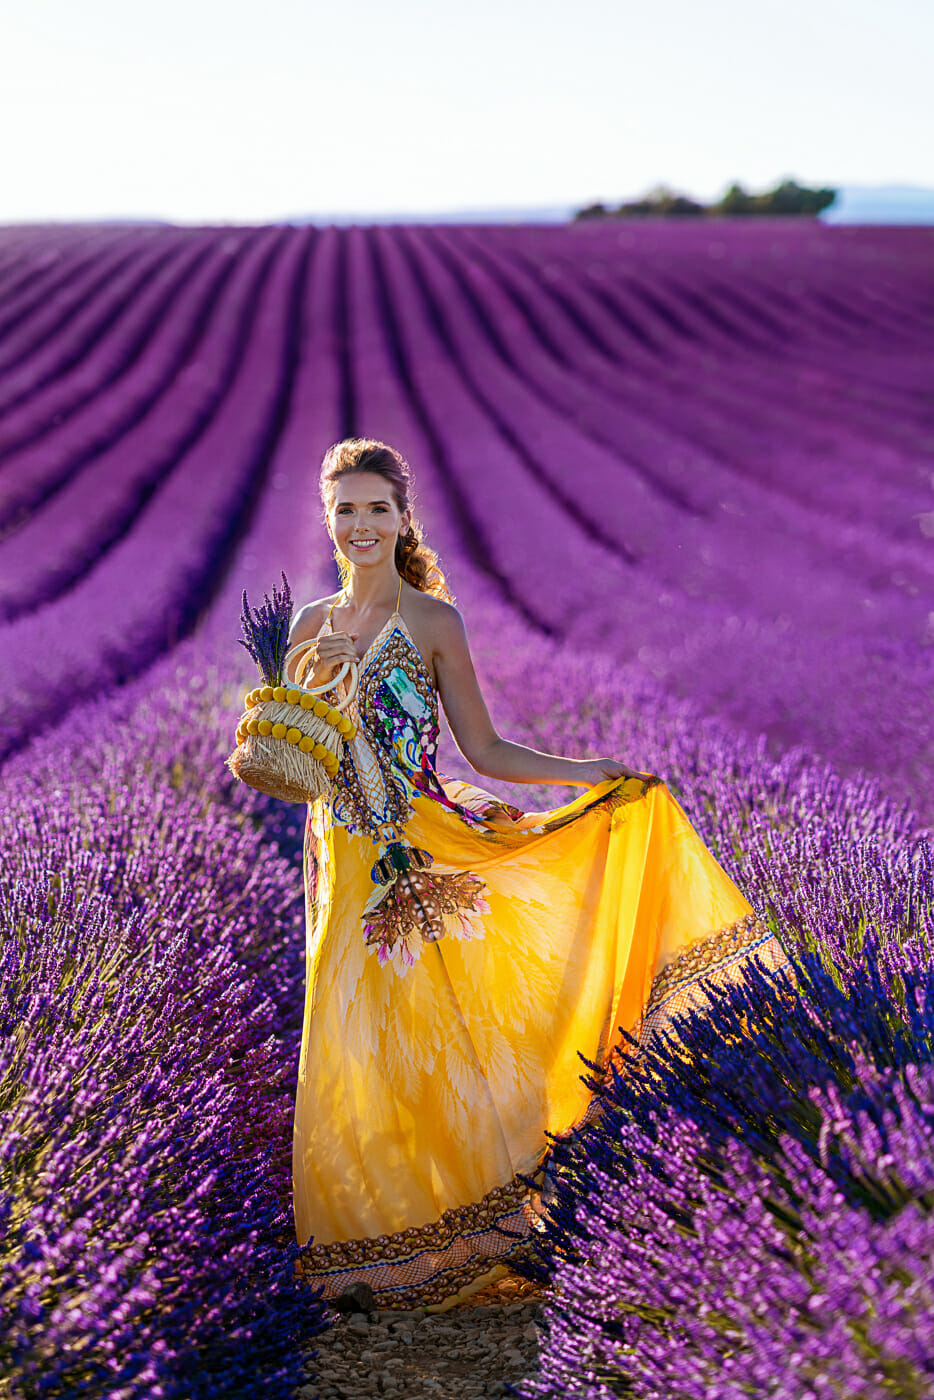 Surprise proposal in the Lavender Fields in Provence France